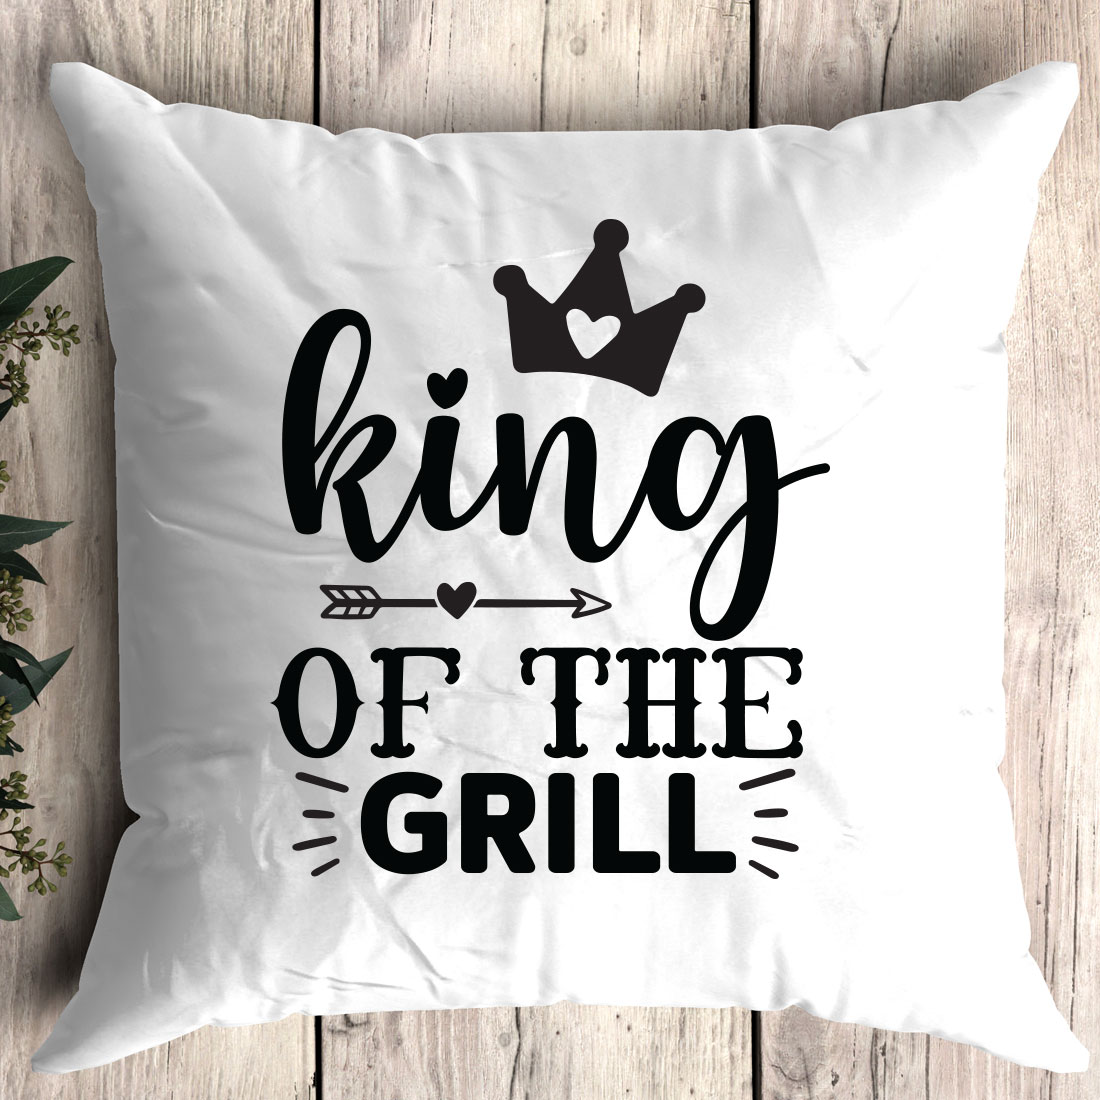 Pillow that says king of the grill.